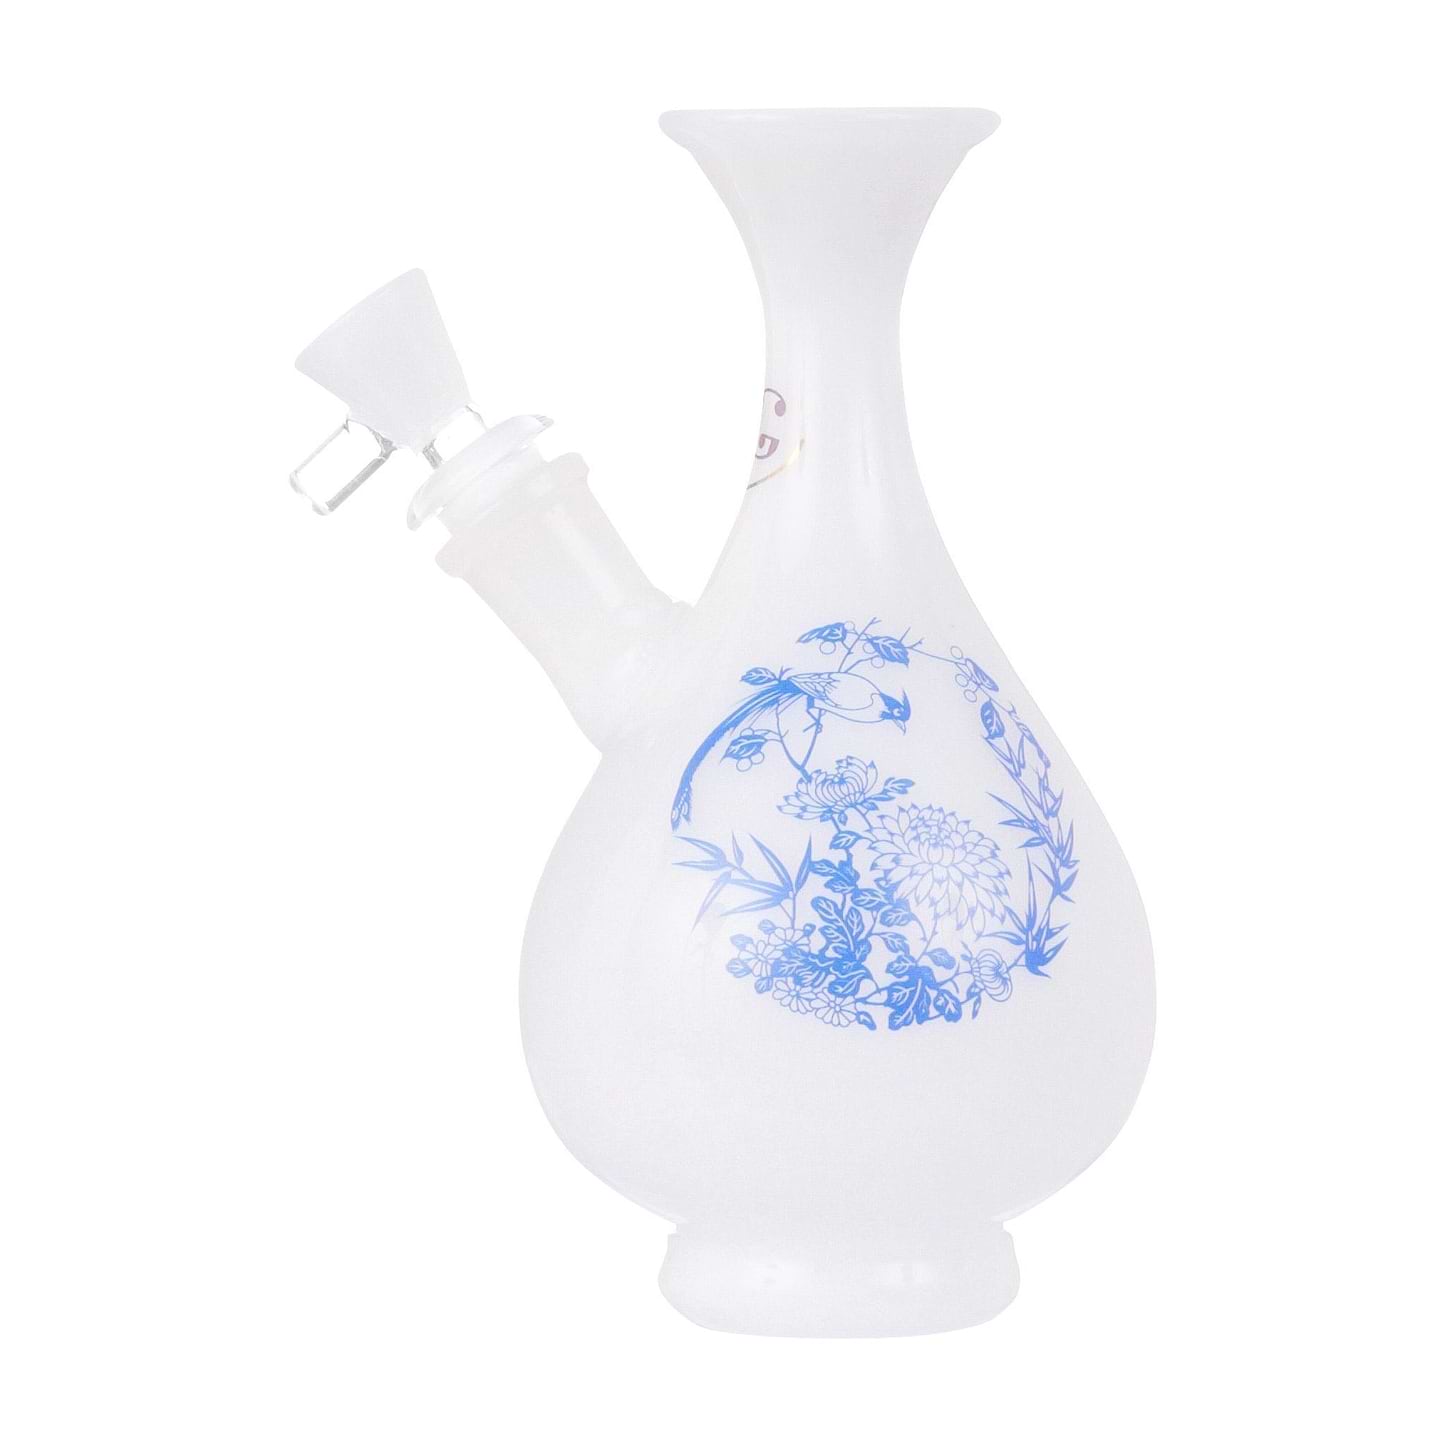 6-inch ceramic bong smoking device with grandma's vase classic china look with lovely print and shape